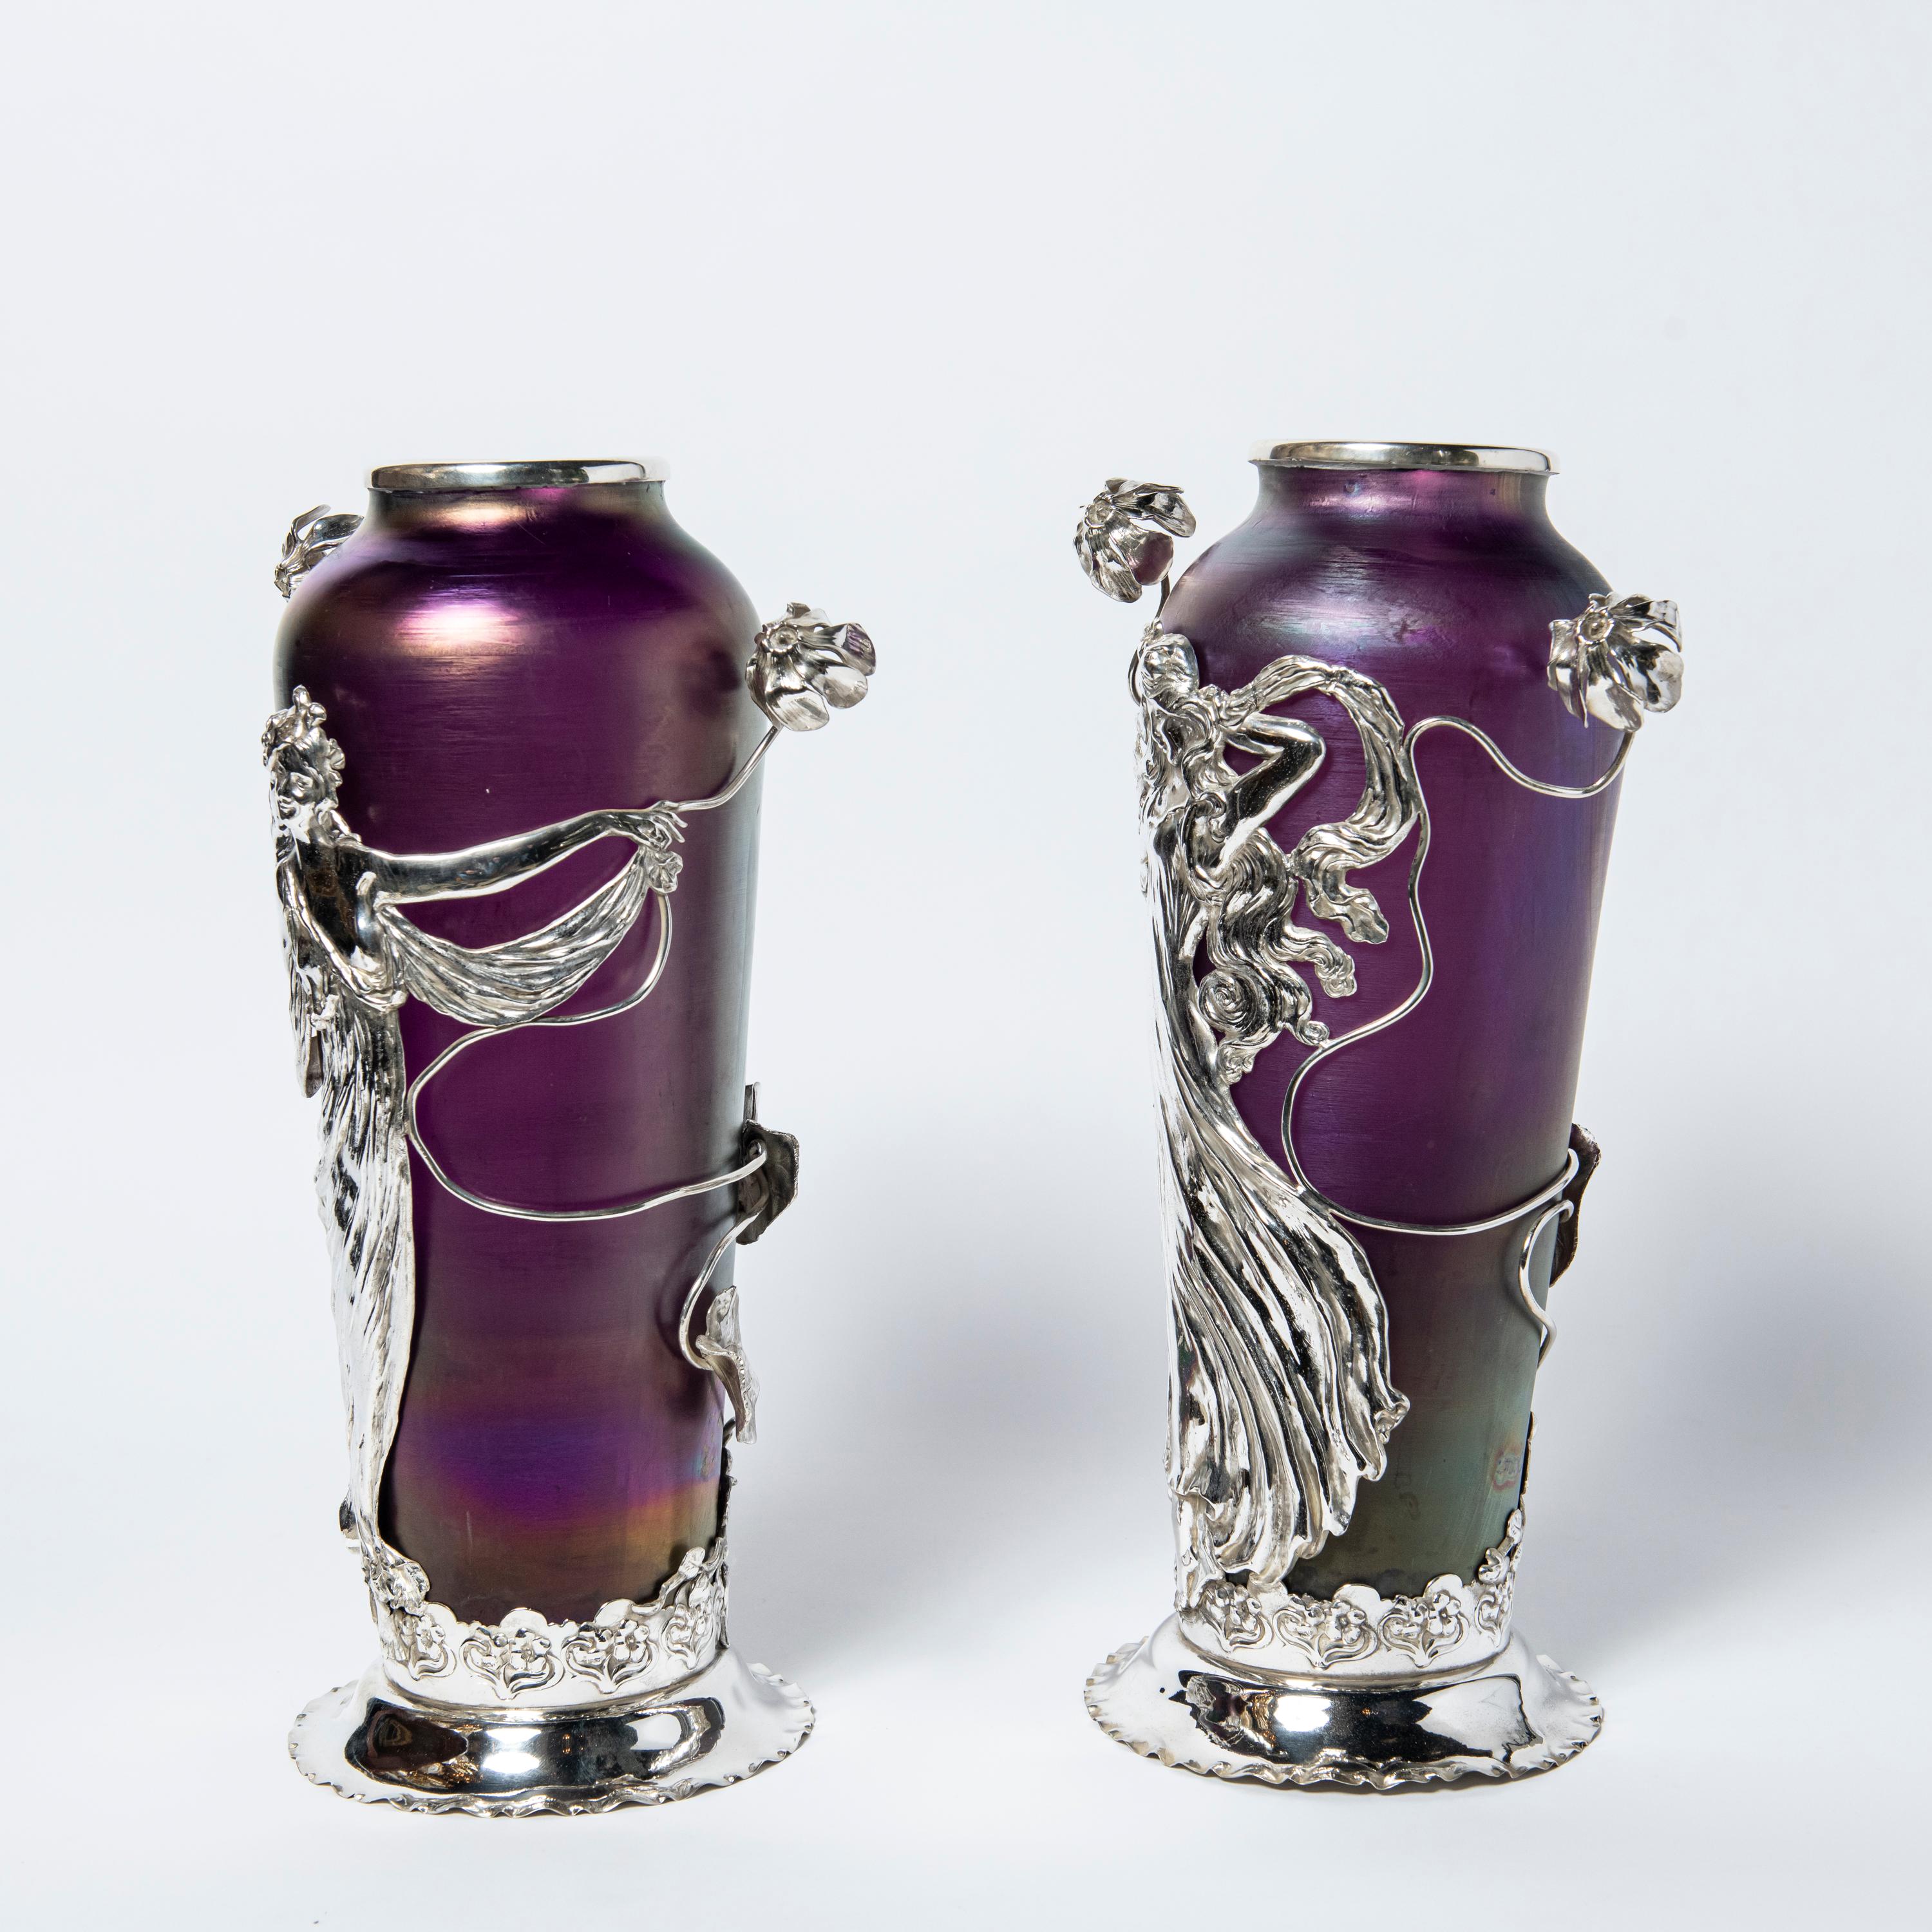 Pair of Loetz glass and silver plate vases. Austria, circa 1900.
Attributed to Loetz.